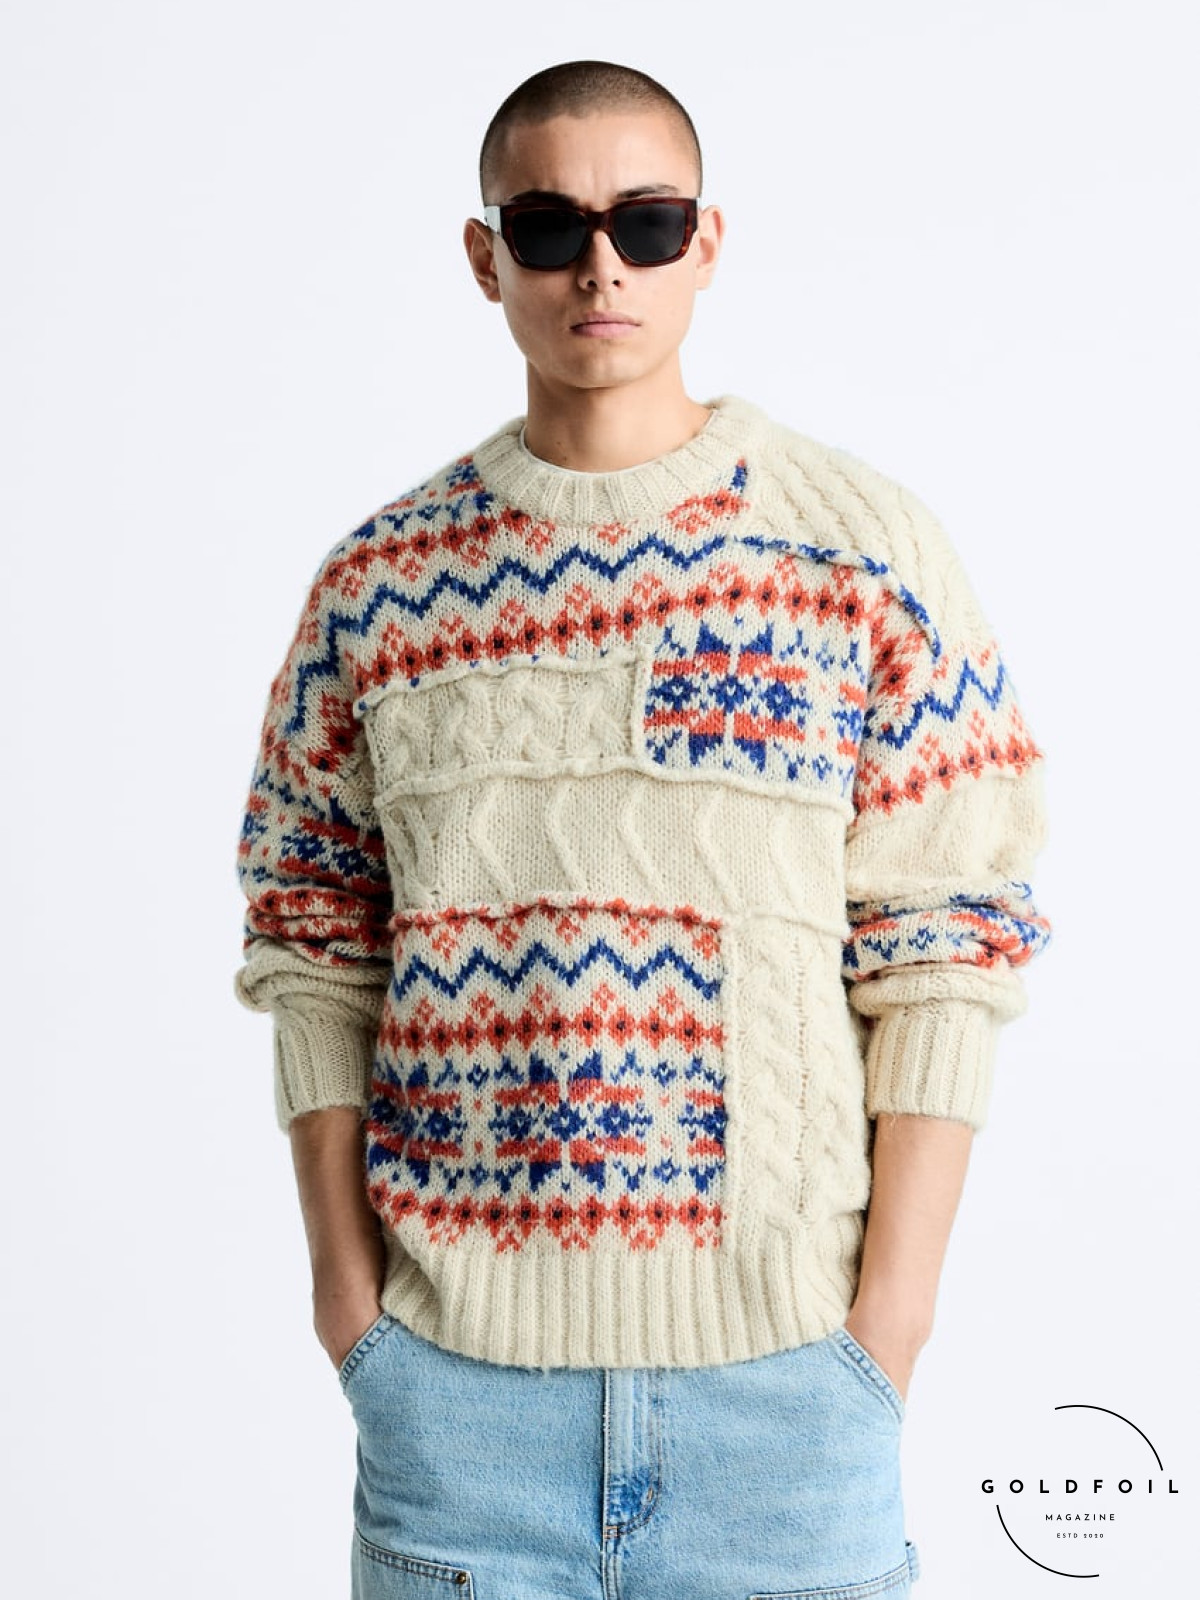 Contrast jacquard sweater from Zara is the perfect Christmas piece for his wardrobe